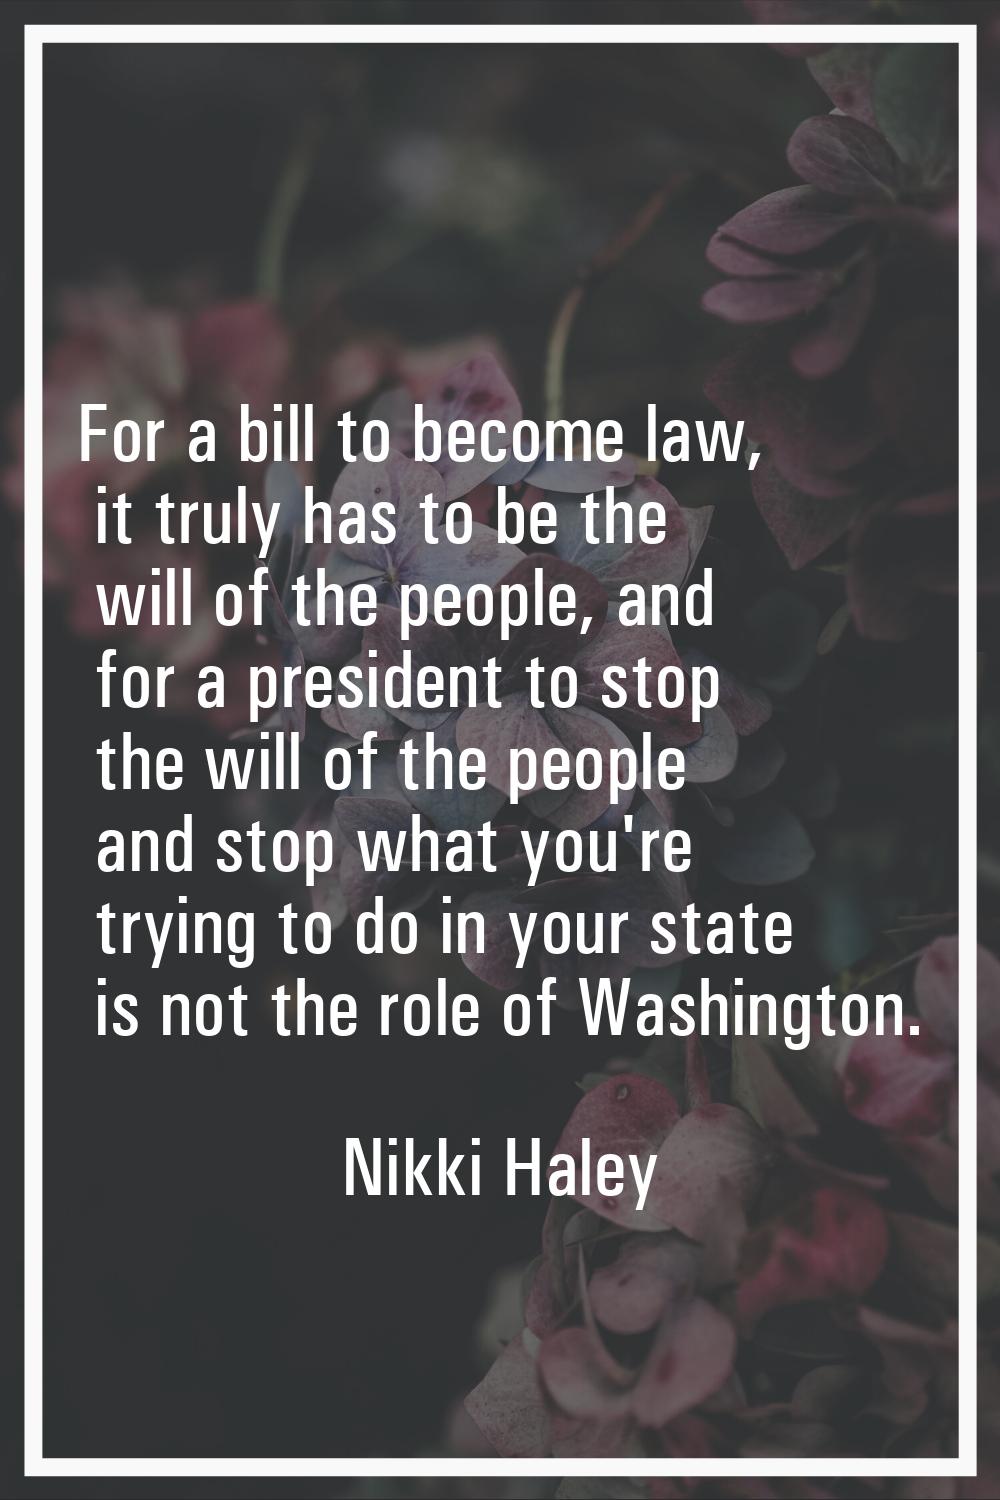 For a bill to become law, it truly has to be the will of the people, and for a president to stop th